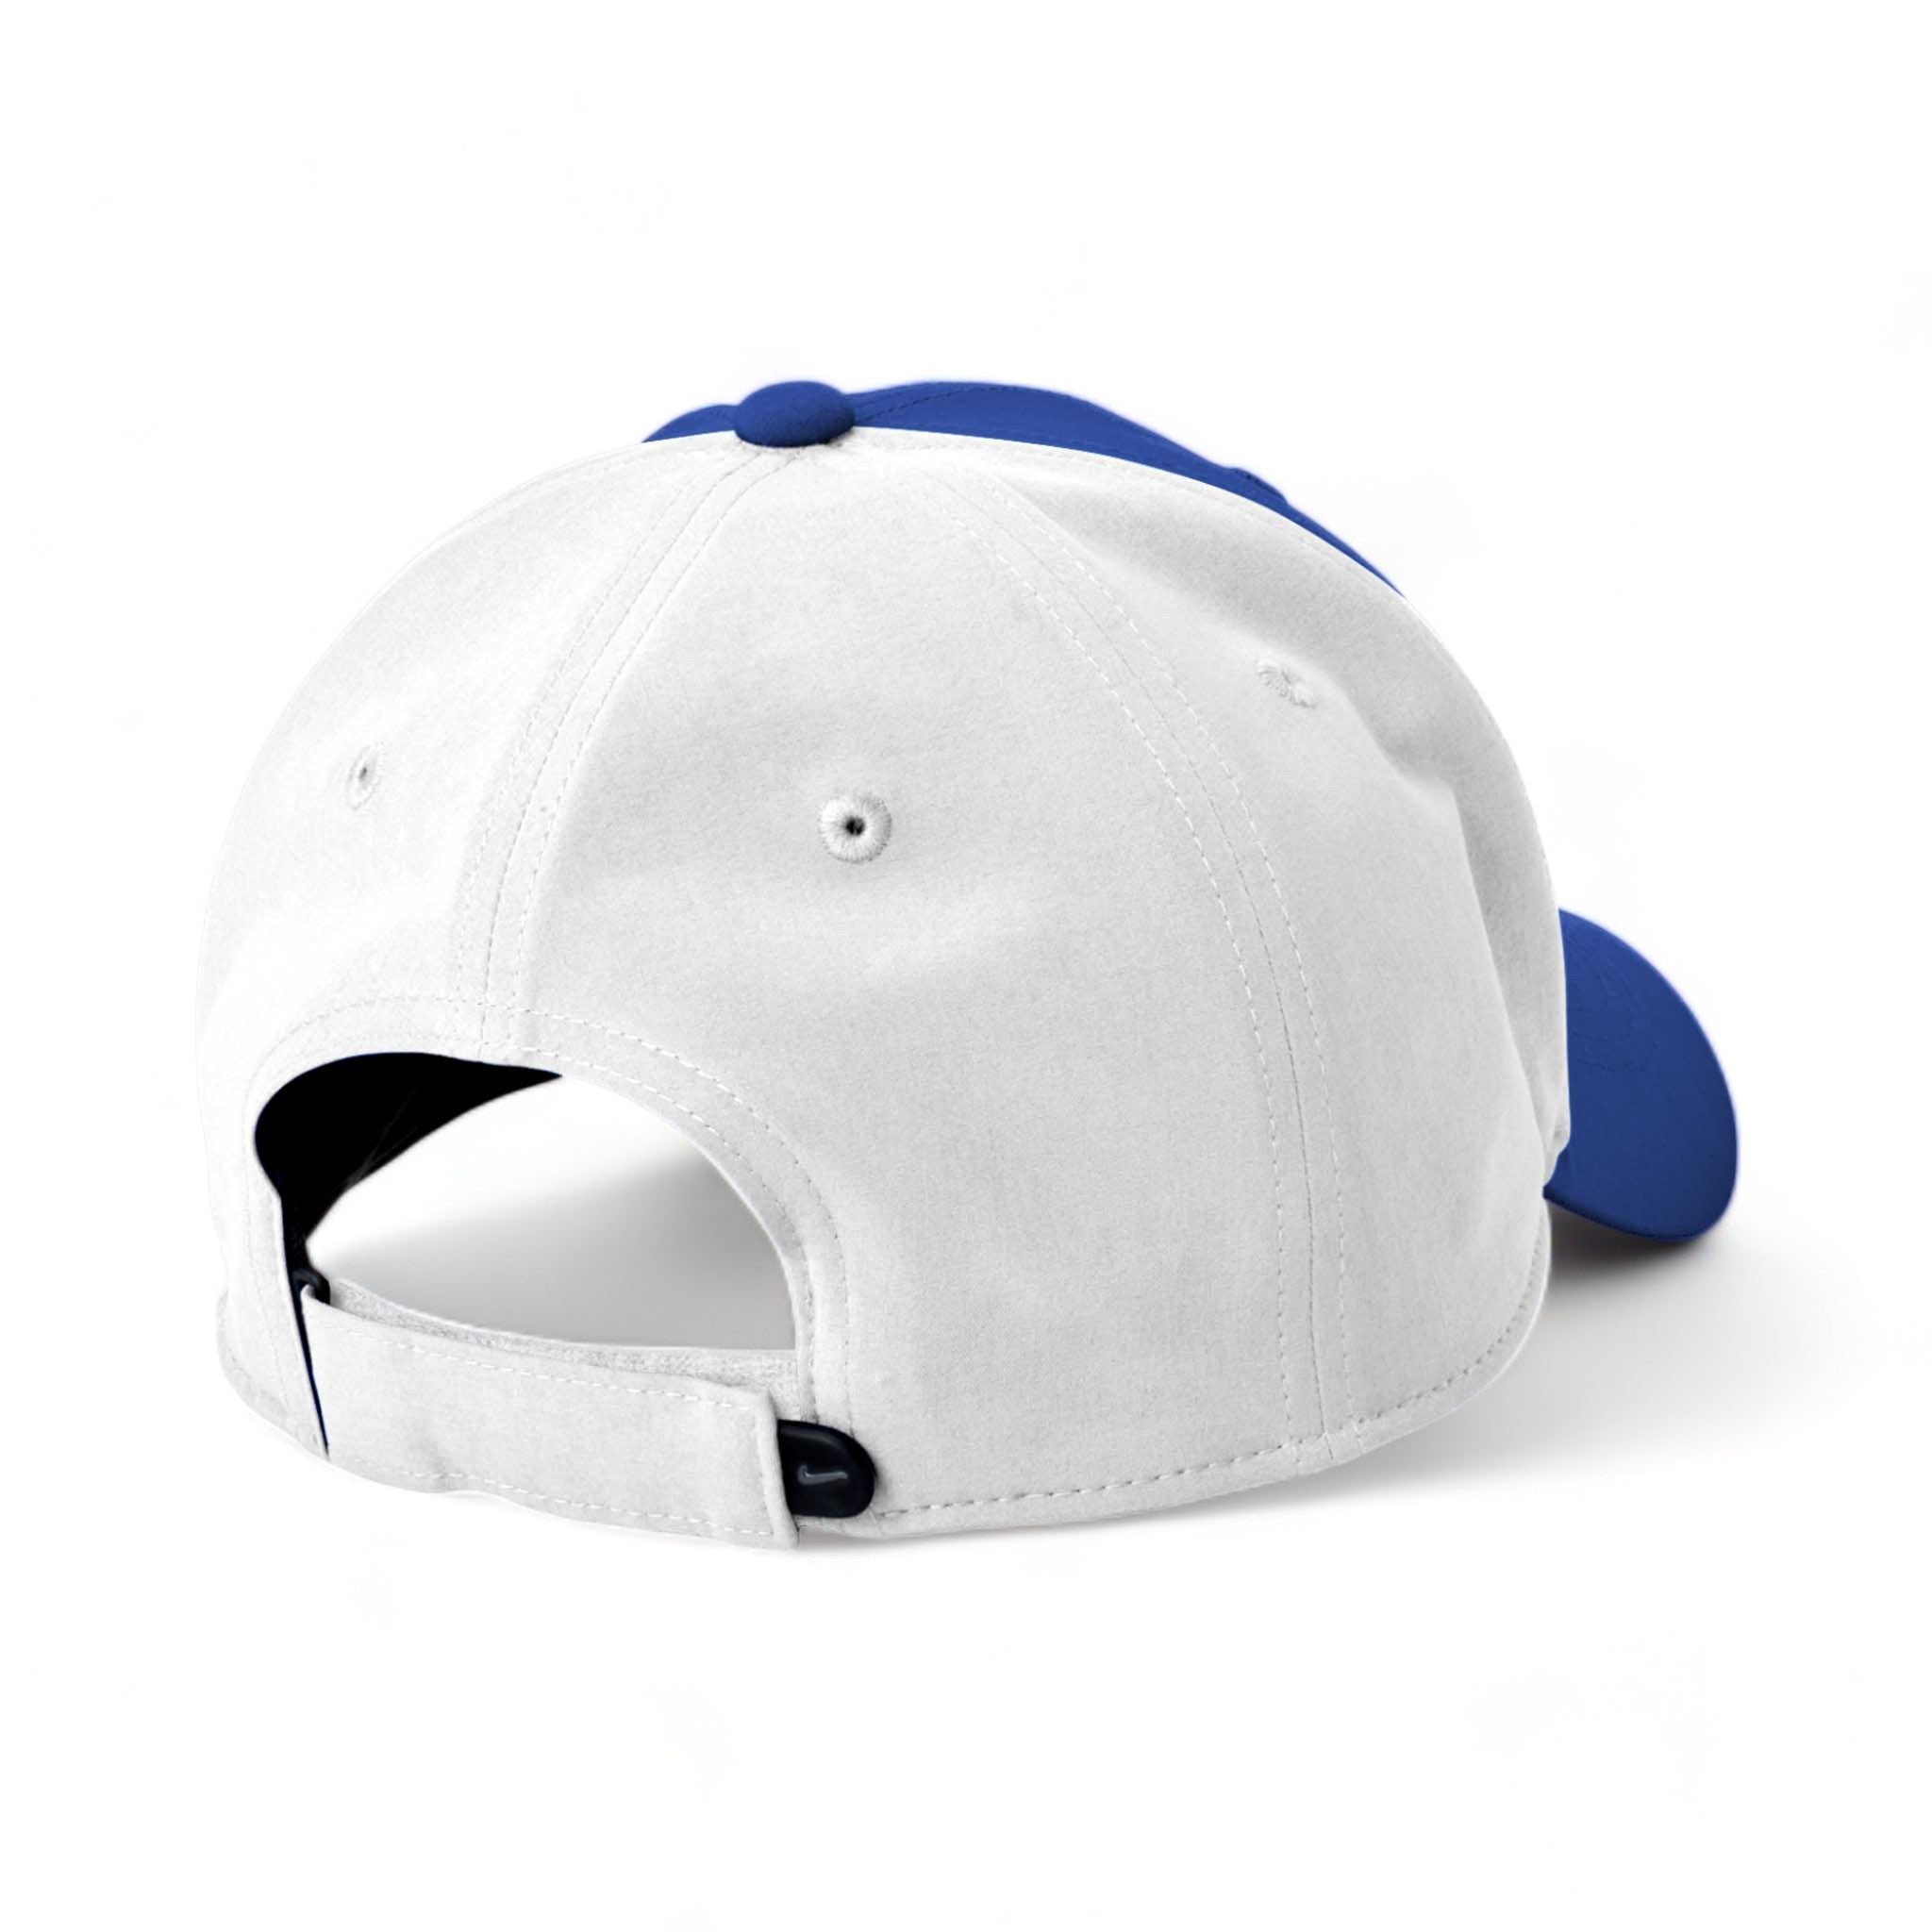 Back view of Nike NKFB6447 custom hat in game royal and white